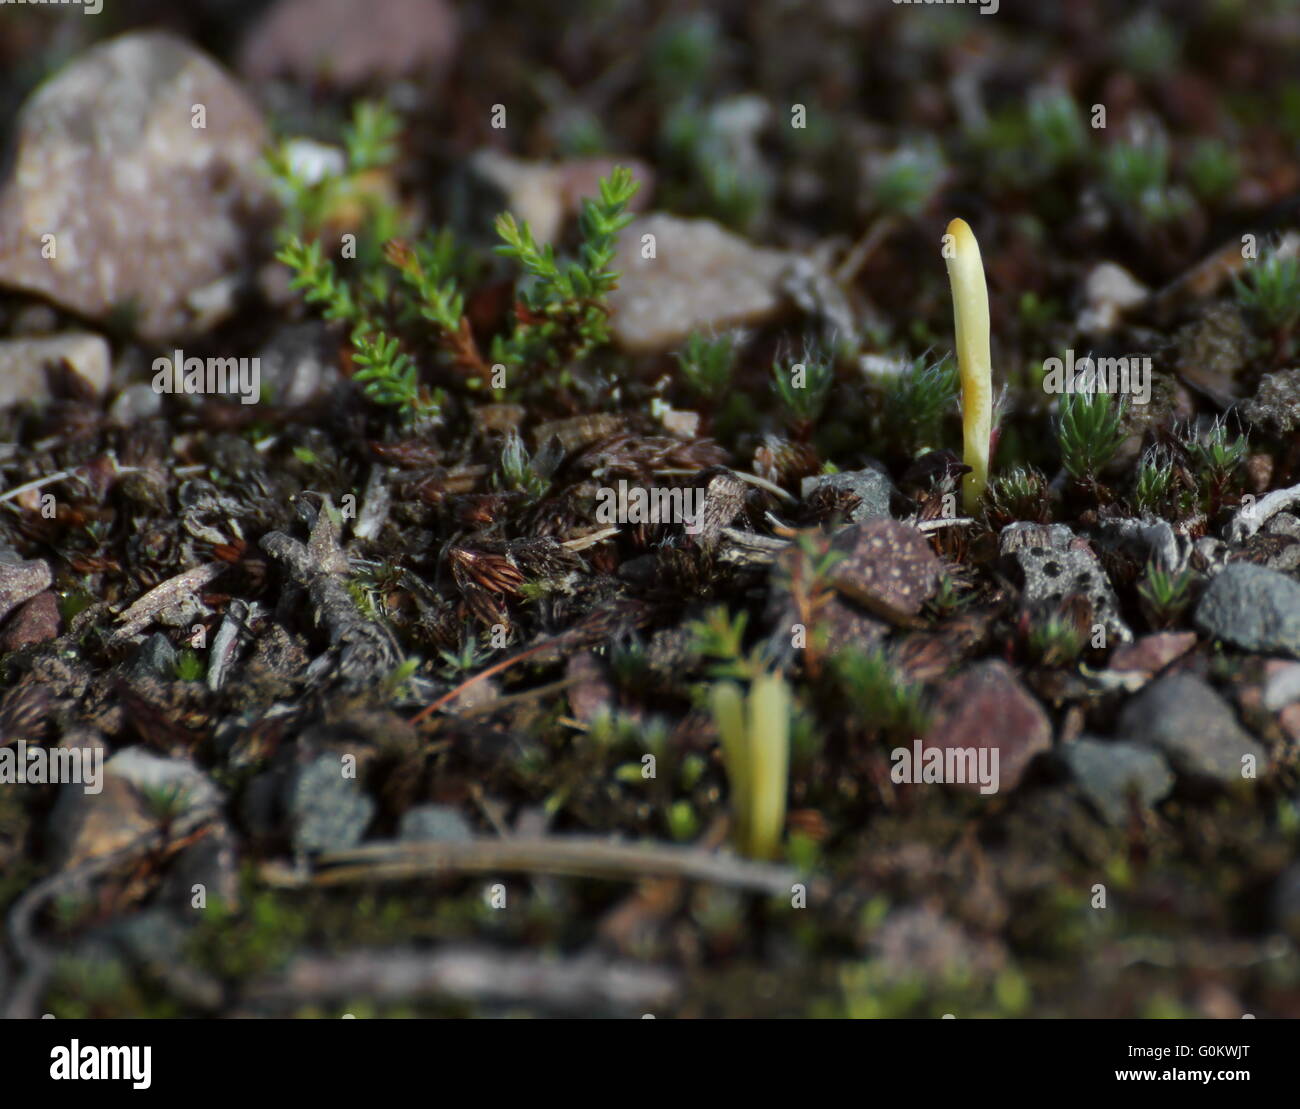 Coral fungus species (Clavaria argillacea) on the ground in Sweden. Stock Photo